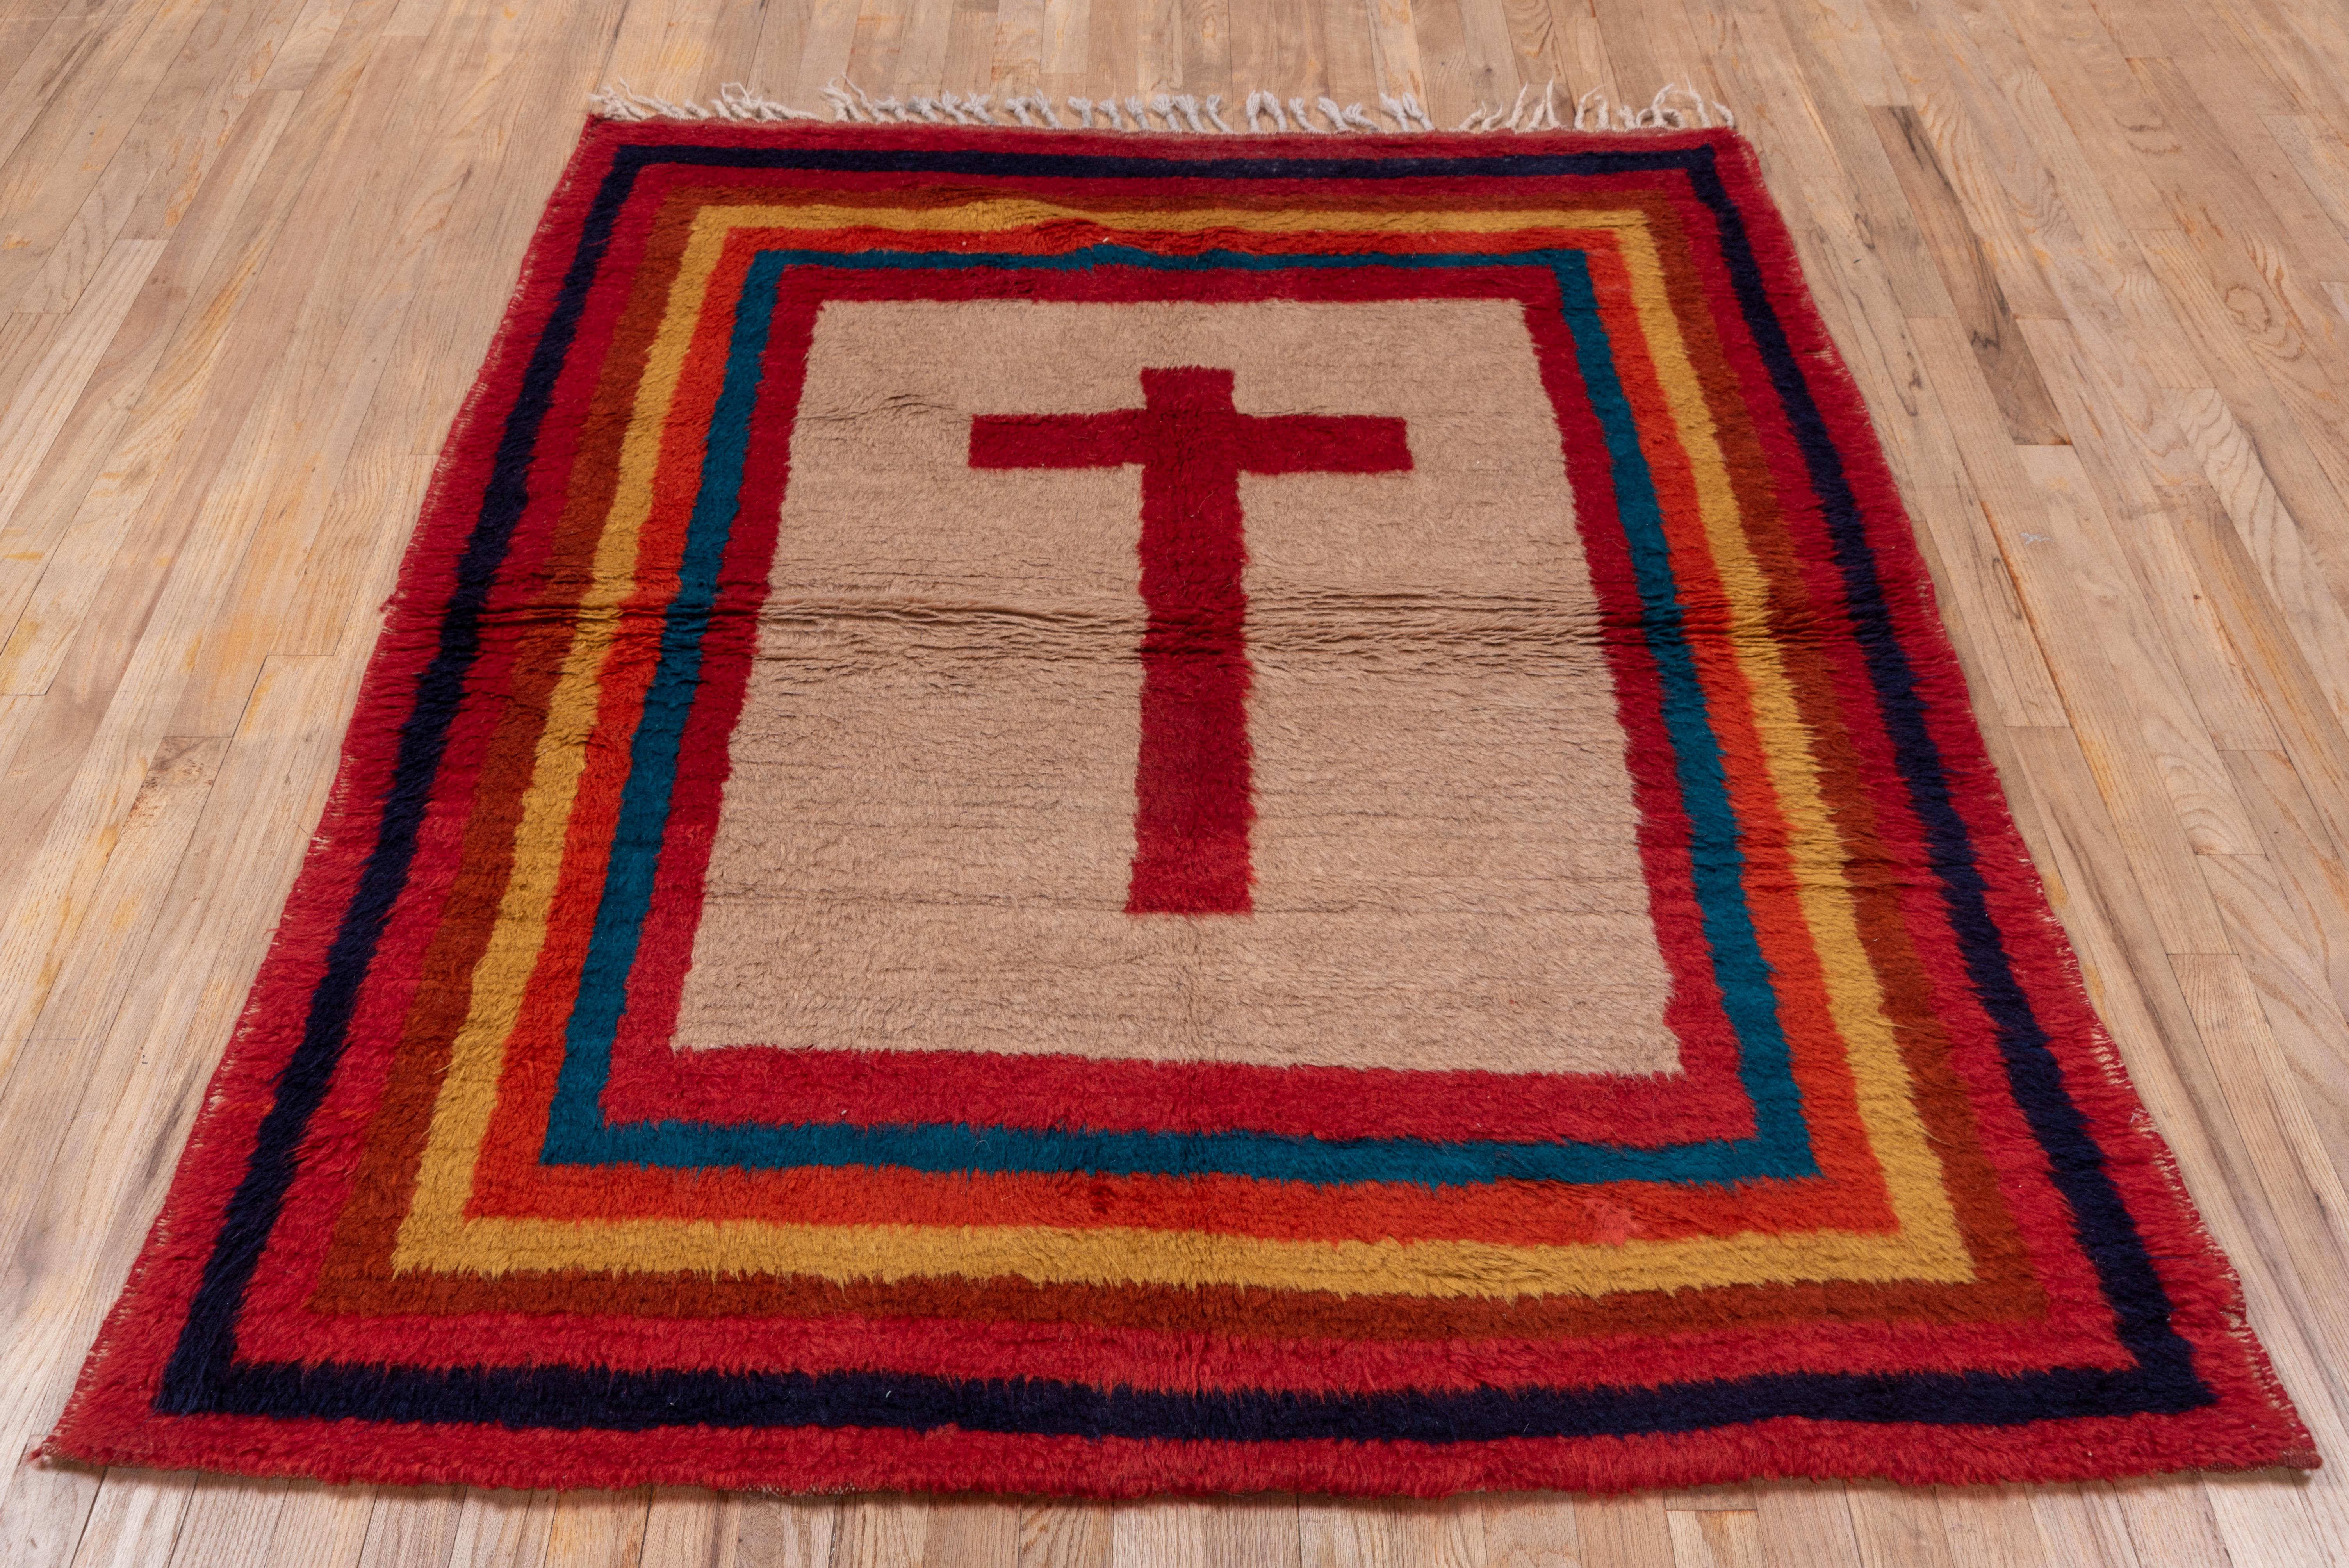 Christian aestheric, , but this is a Qashghai Gabbeh that was made by Islamic nomads, and displays  a red cross on a plain light brown ground, within numerous plain borders in  yellow, red, rust and blue. Tassels at one end intact,. Makes a striking